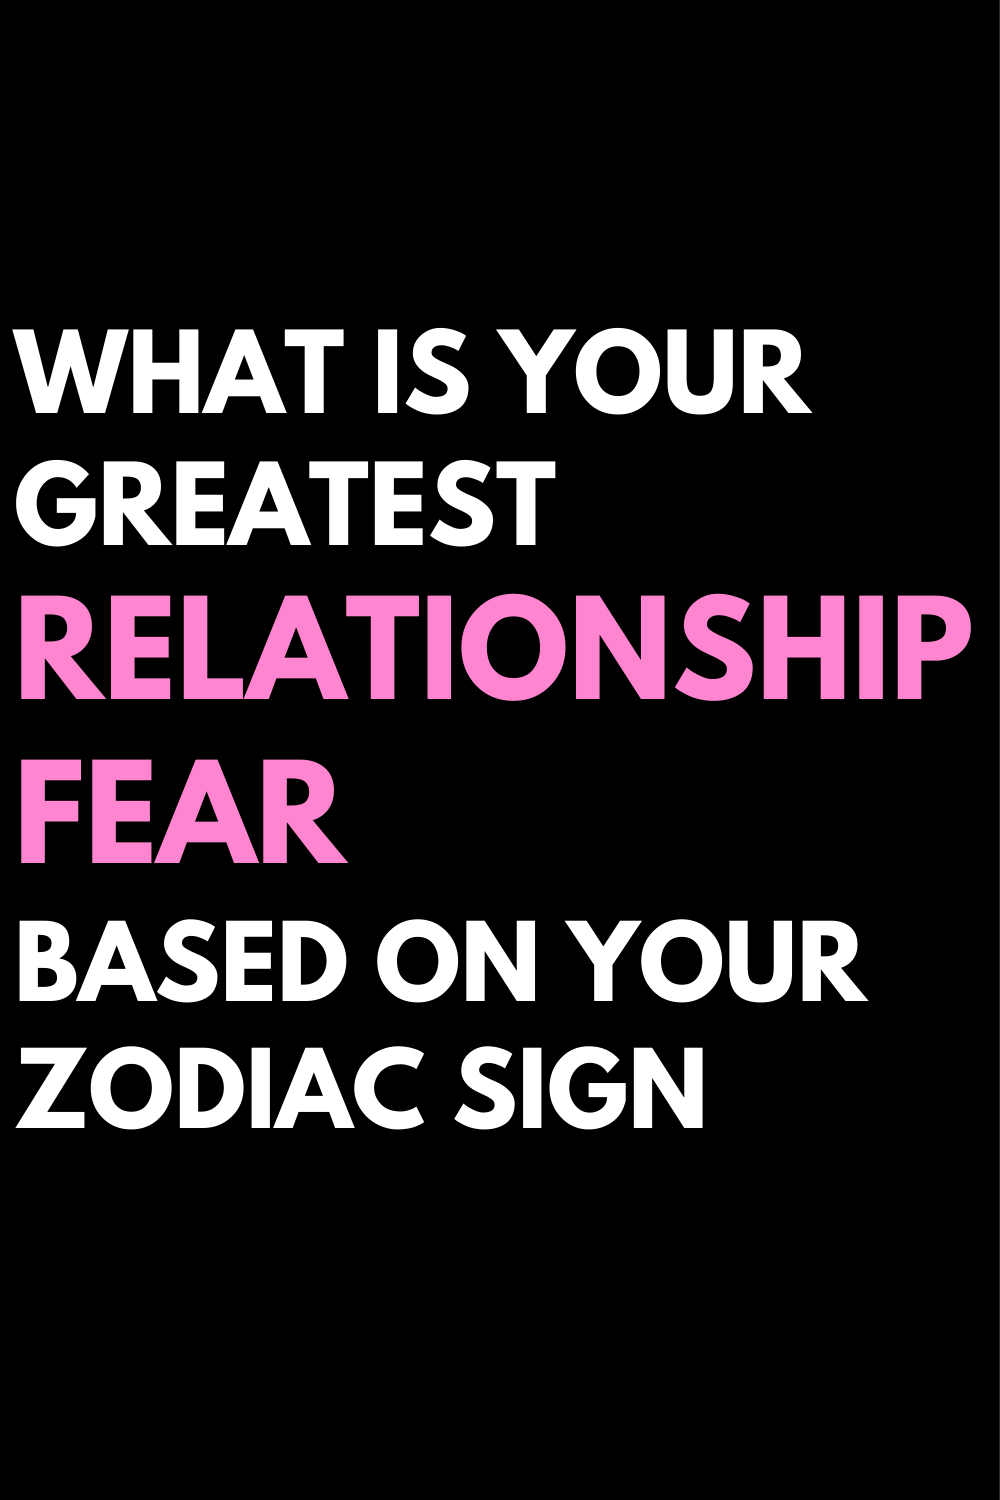 What is your greatest relationship fear based on your zodiac sign